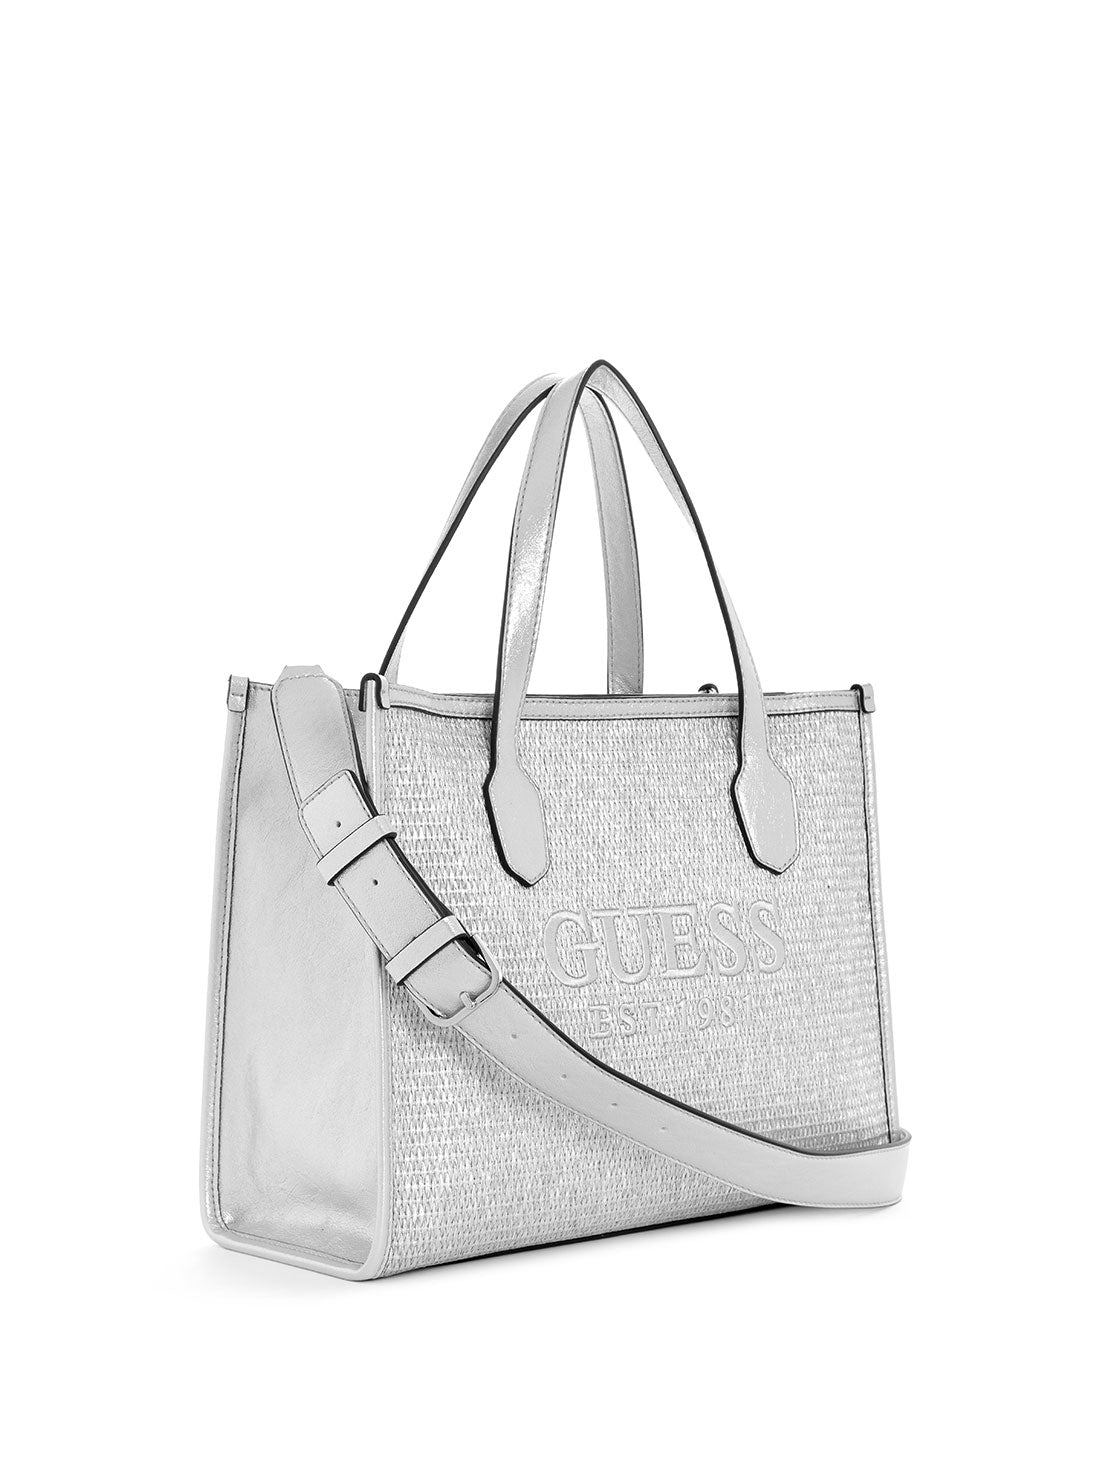 GUESS Silver Silvana Tote Bag side view